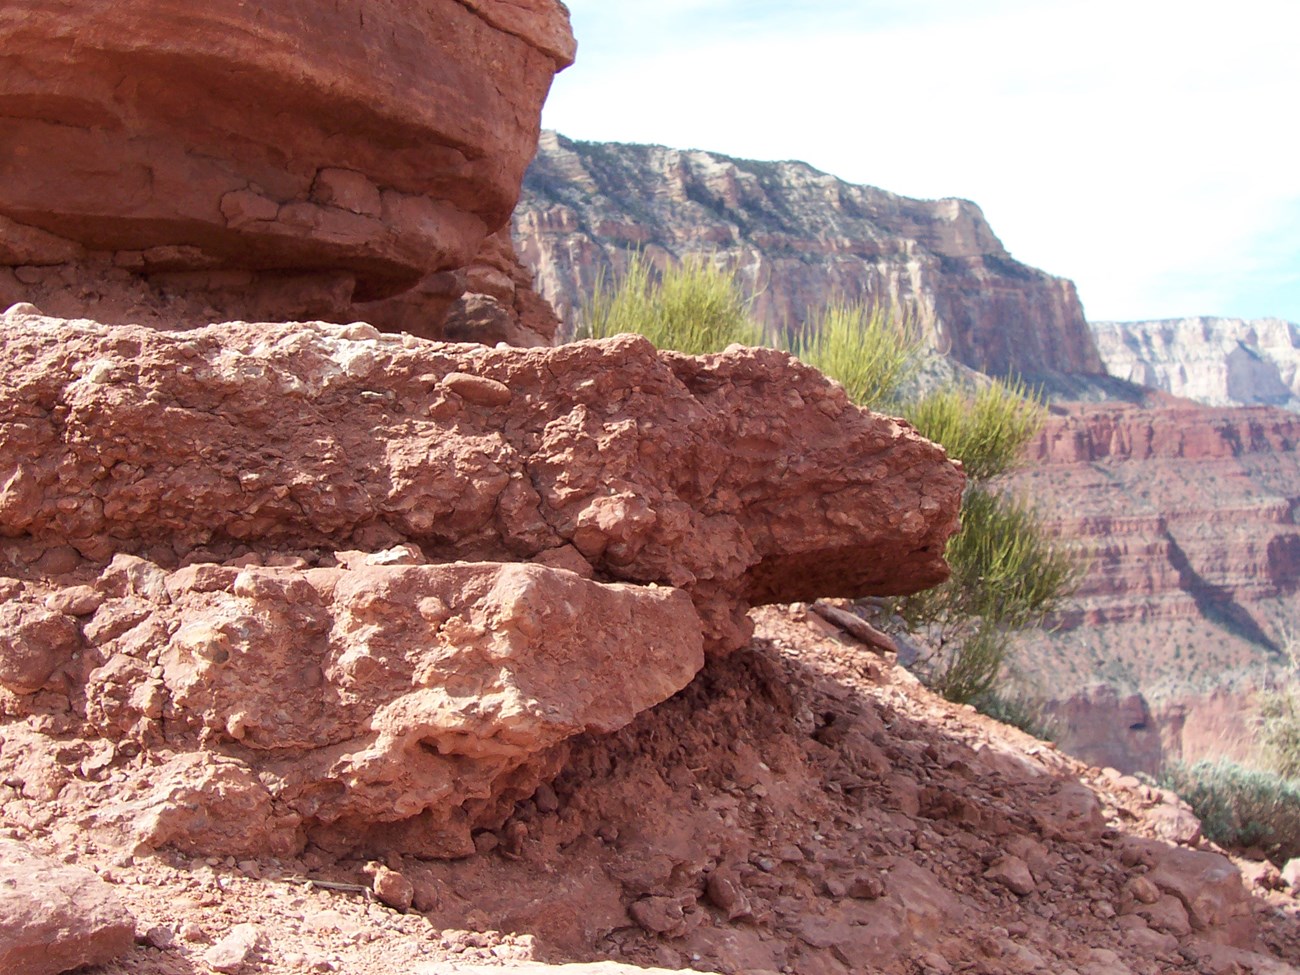 Photo showing details of a rock layer within the cliffs of the Grand Canyon.